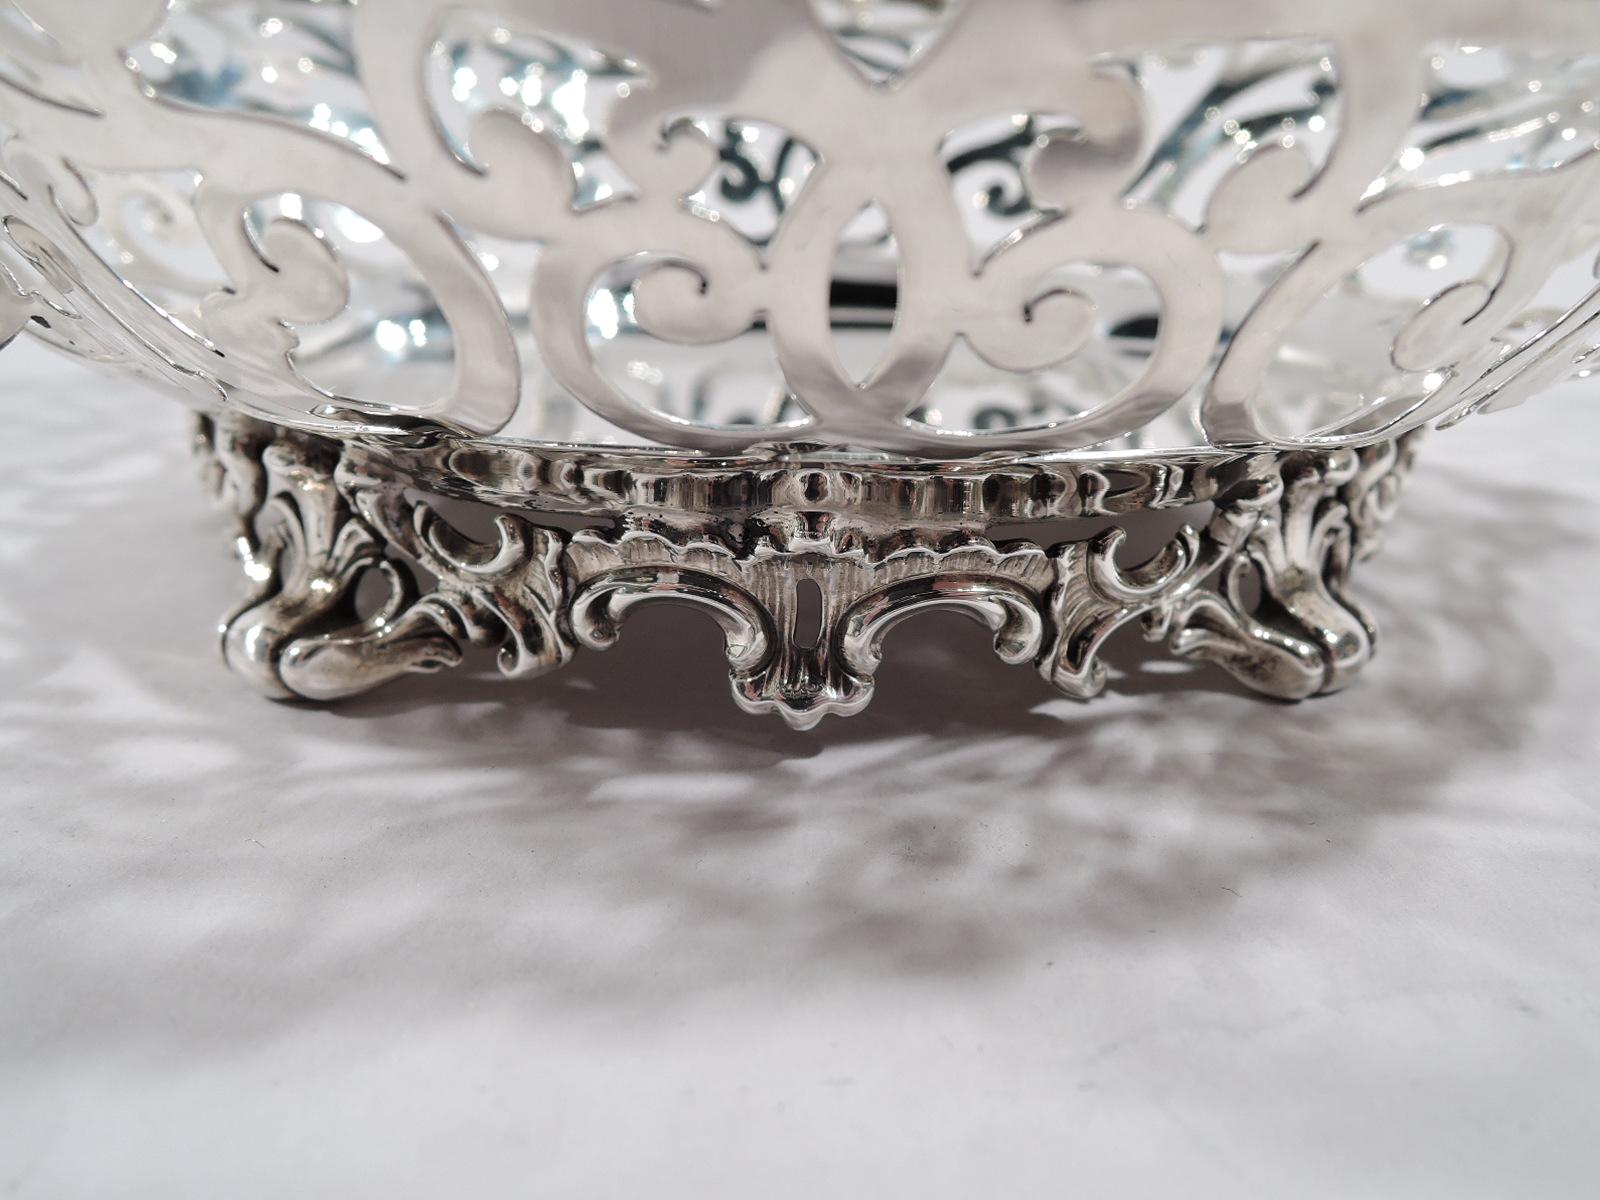 Pair of Antique Howard Edwardian Sterling Silver Openwork Bowls 1